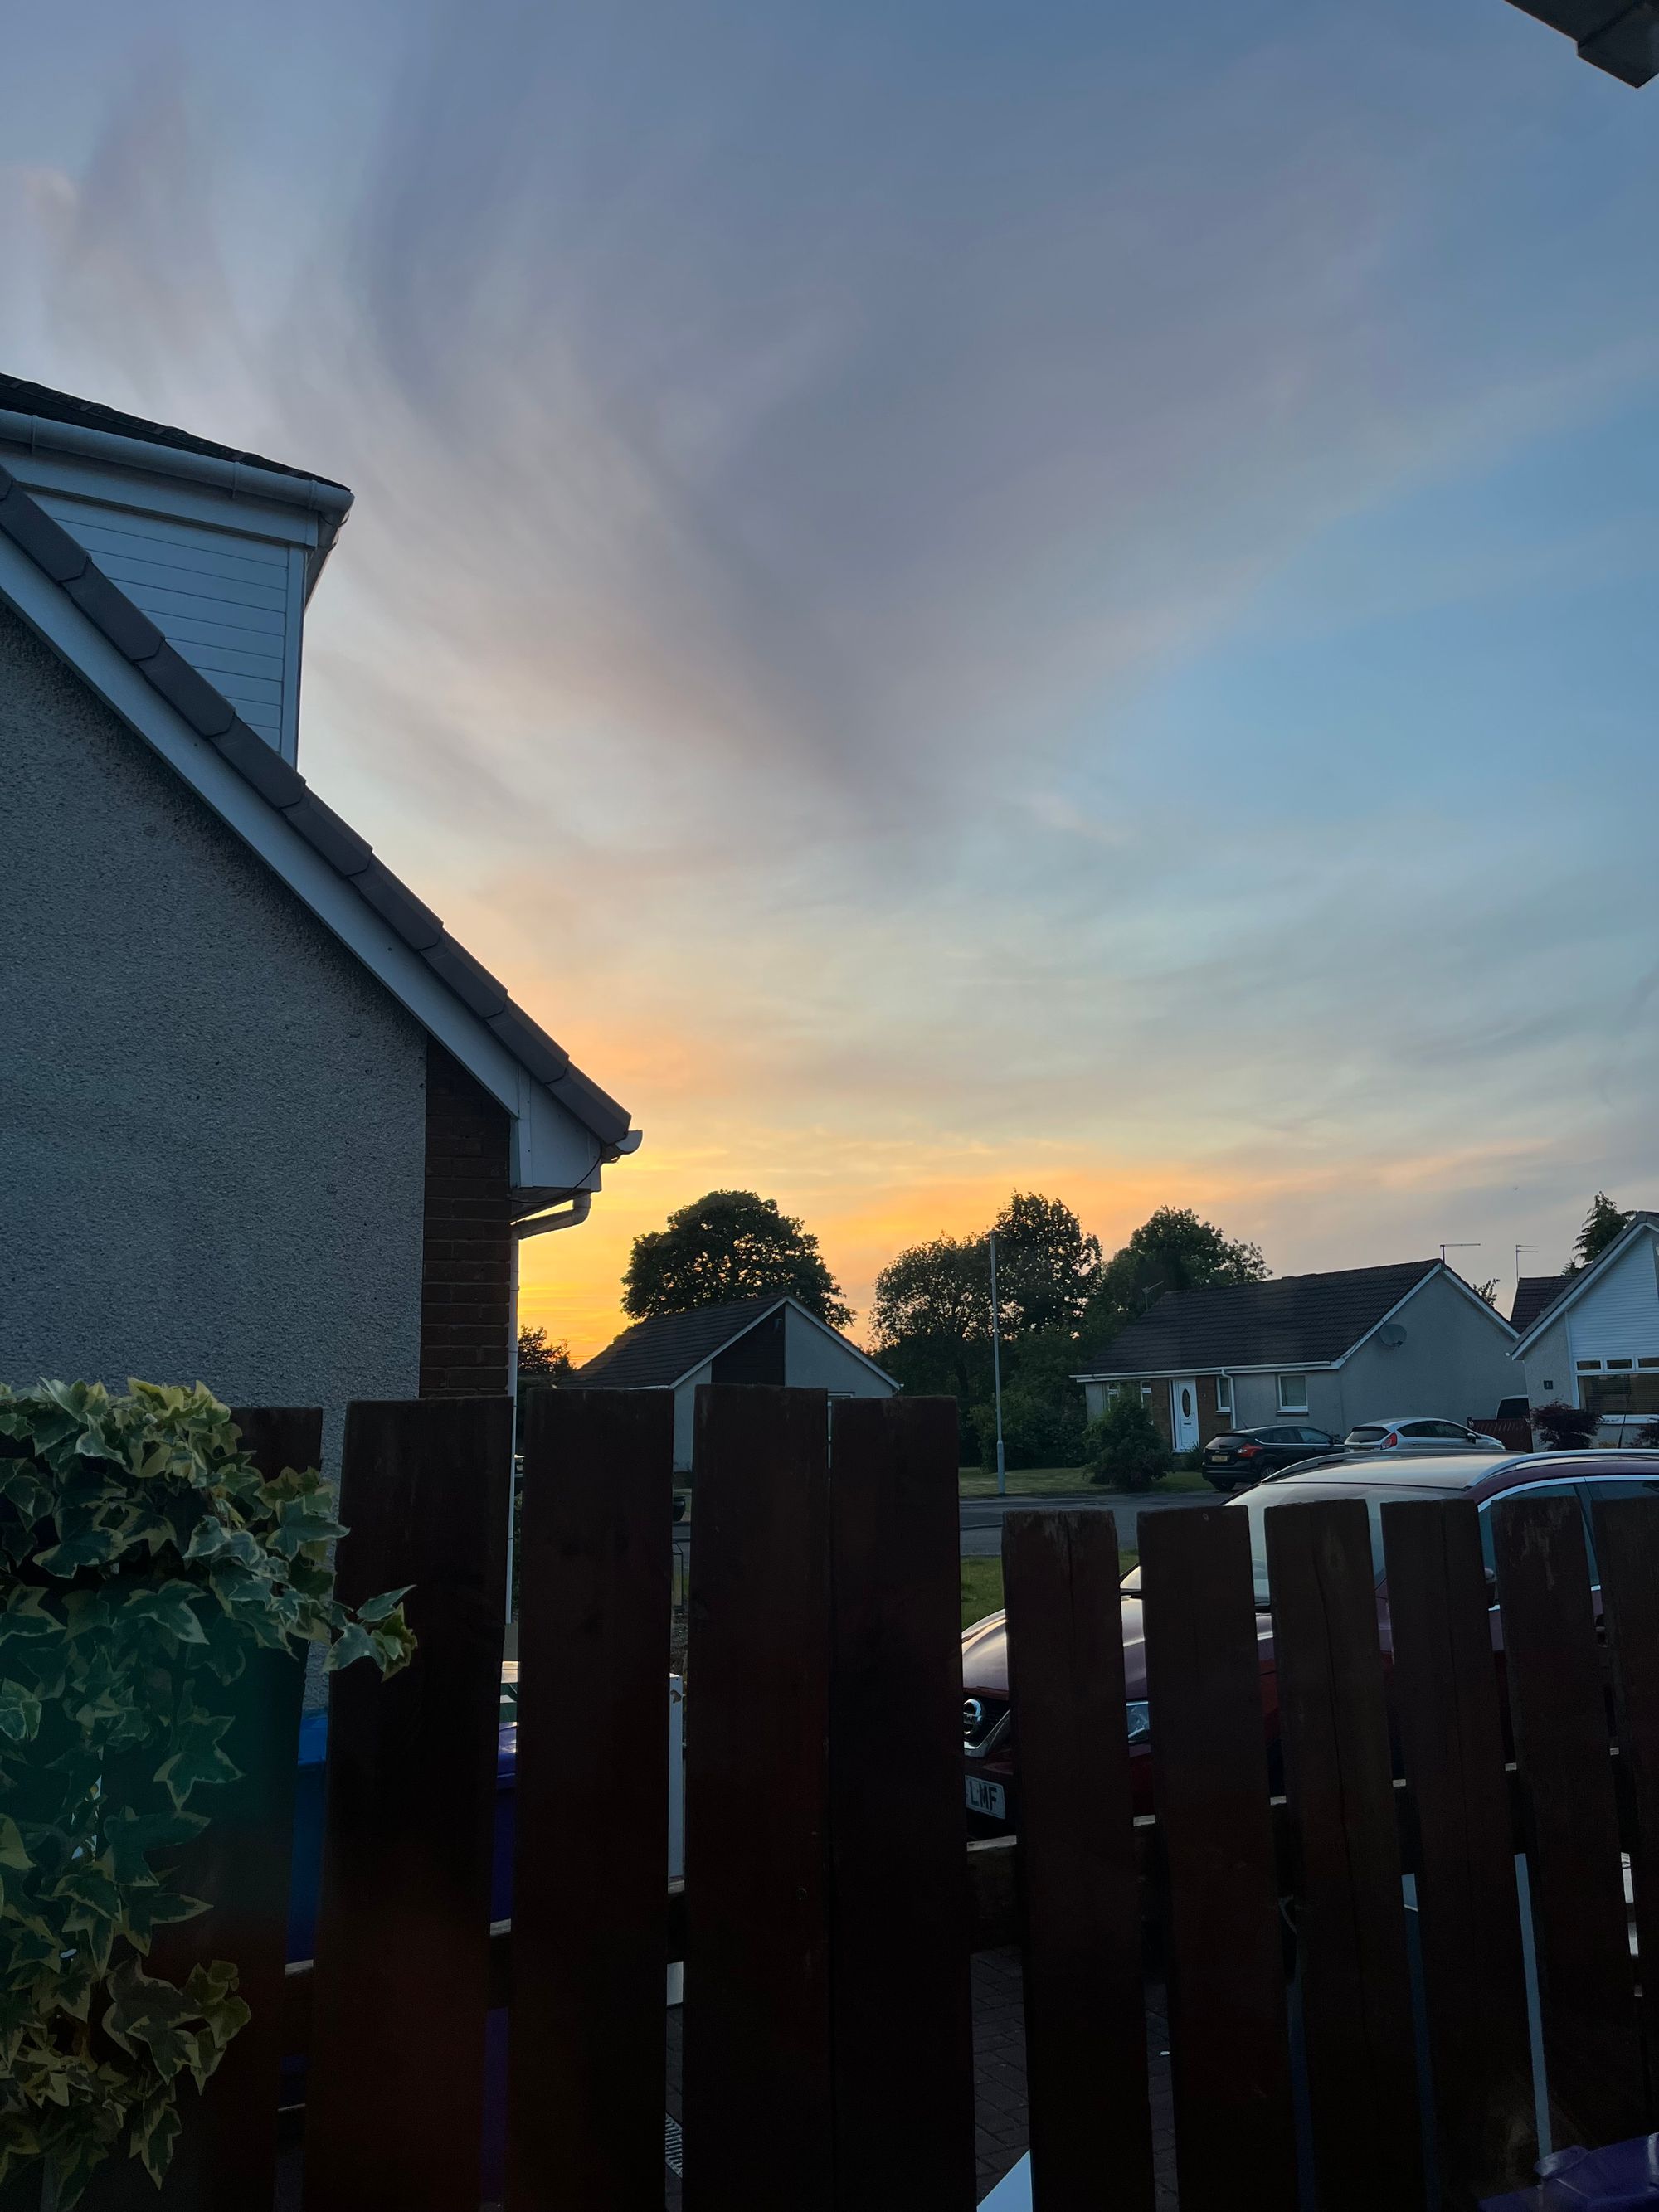 An evening sky glimpsed over a wooden fence and rooftops of detached houses, still full of the bright gold of a sunset's afterglow.